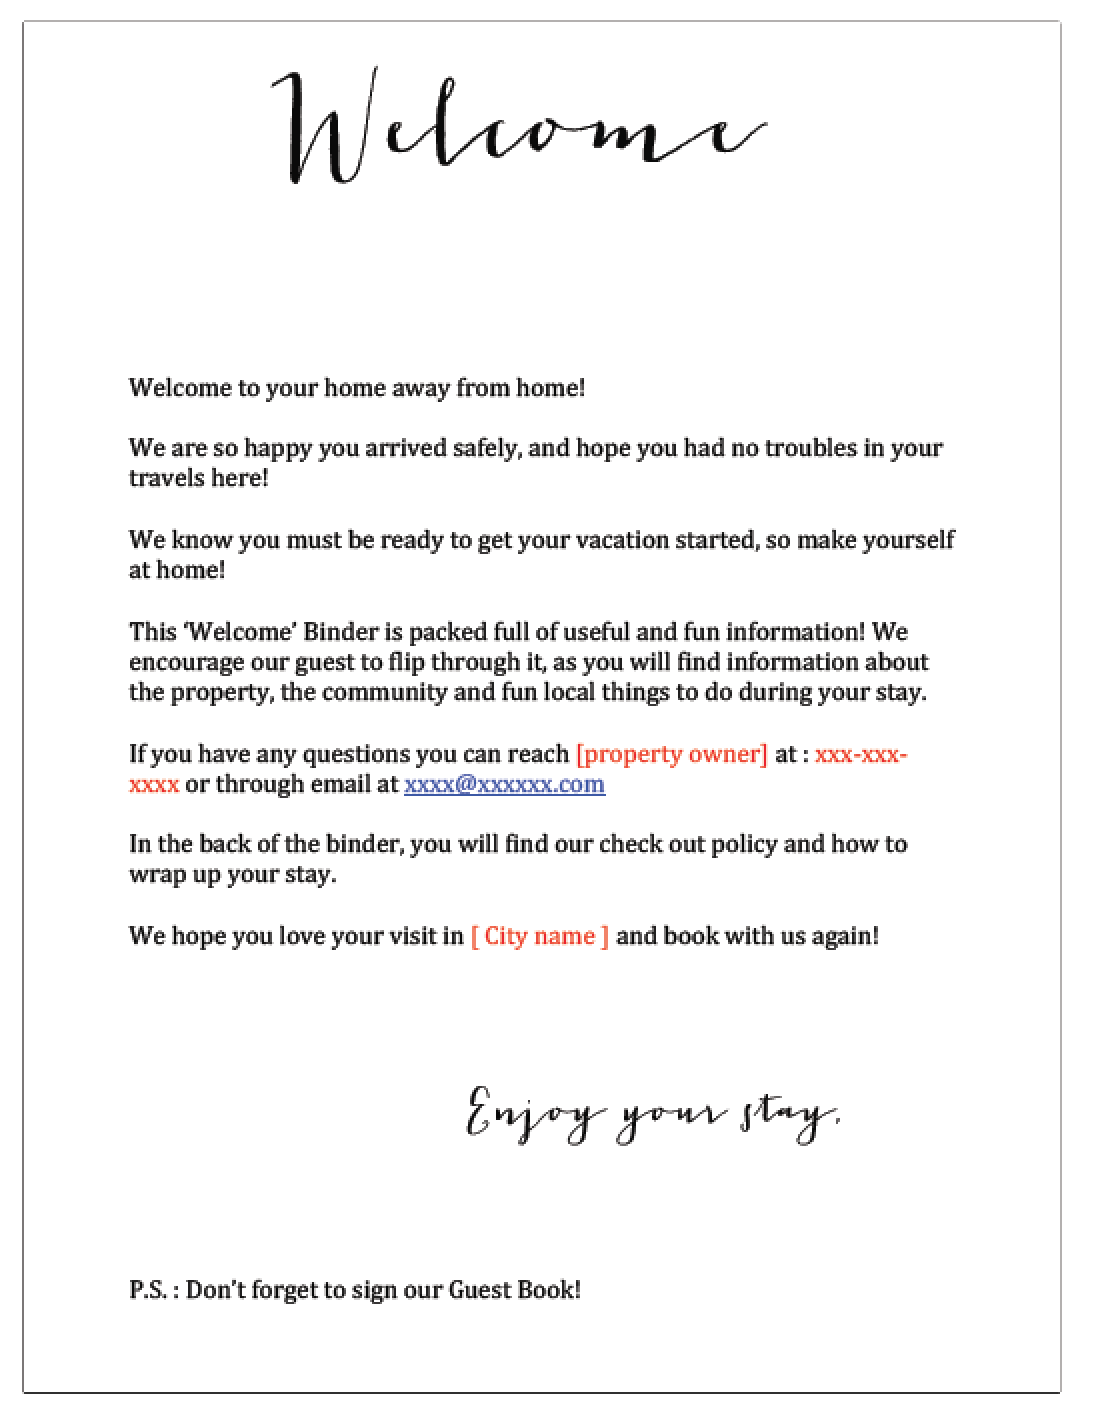 travel agent welcome home letter